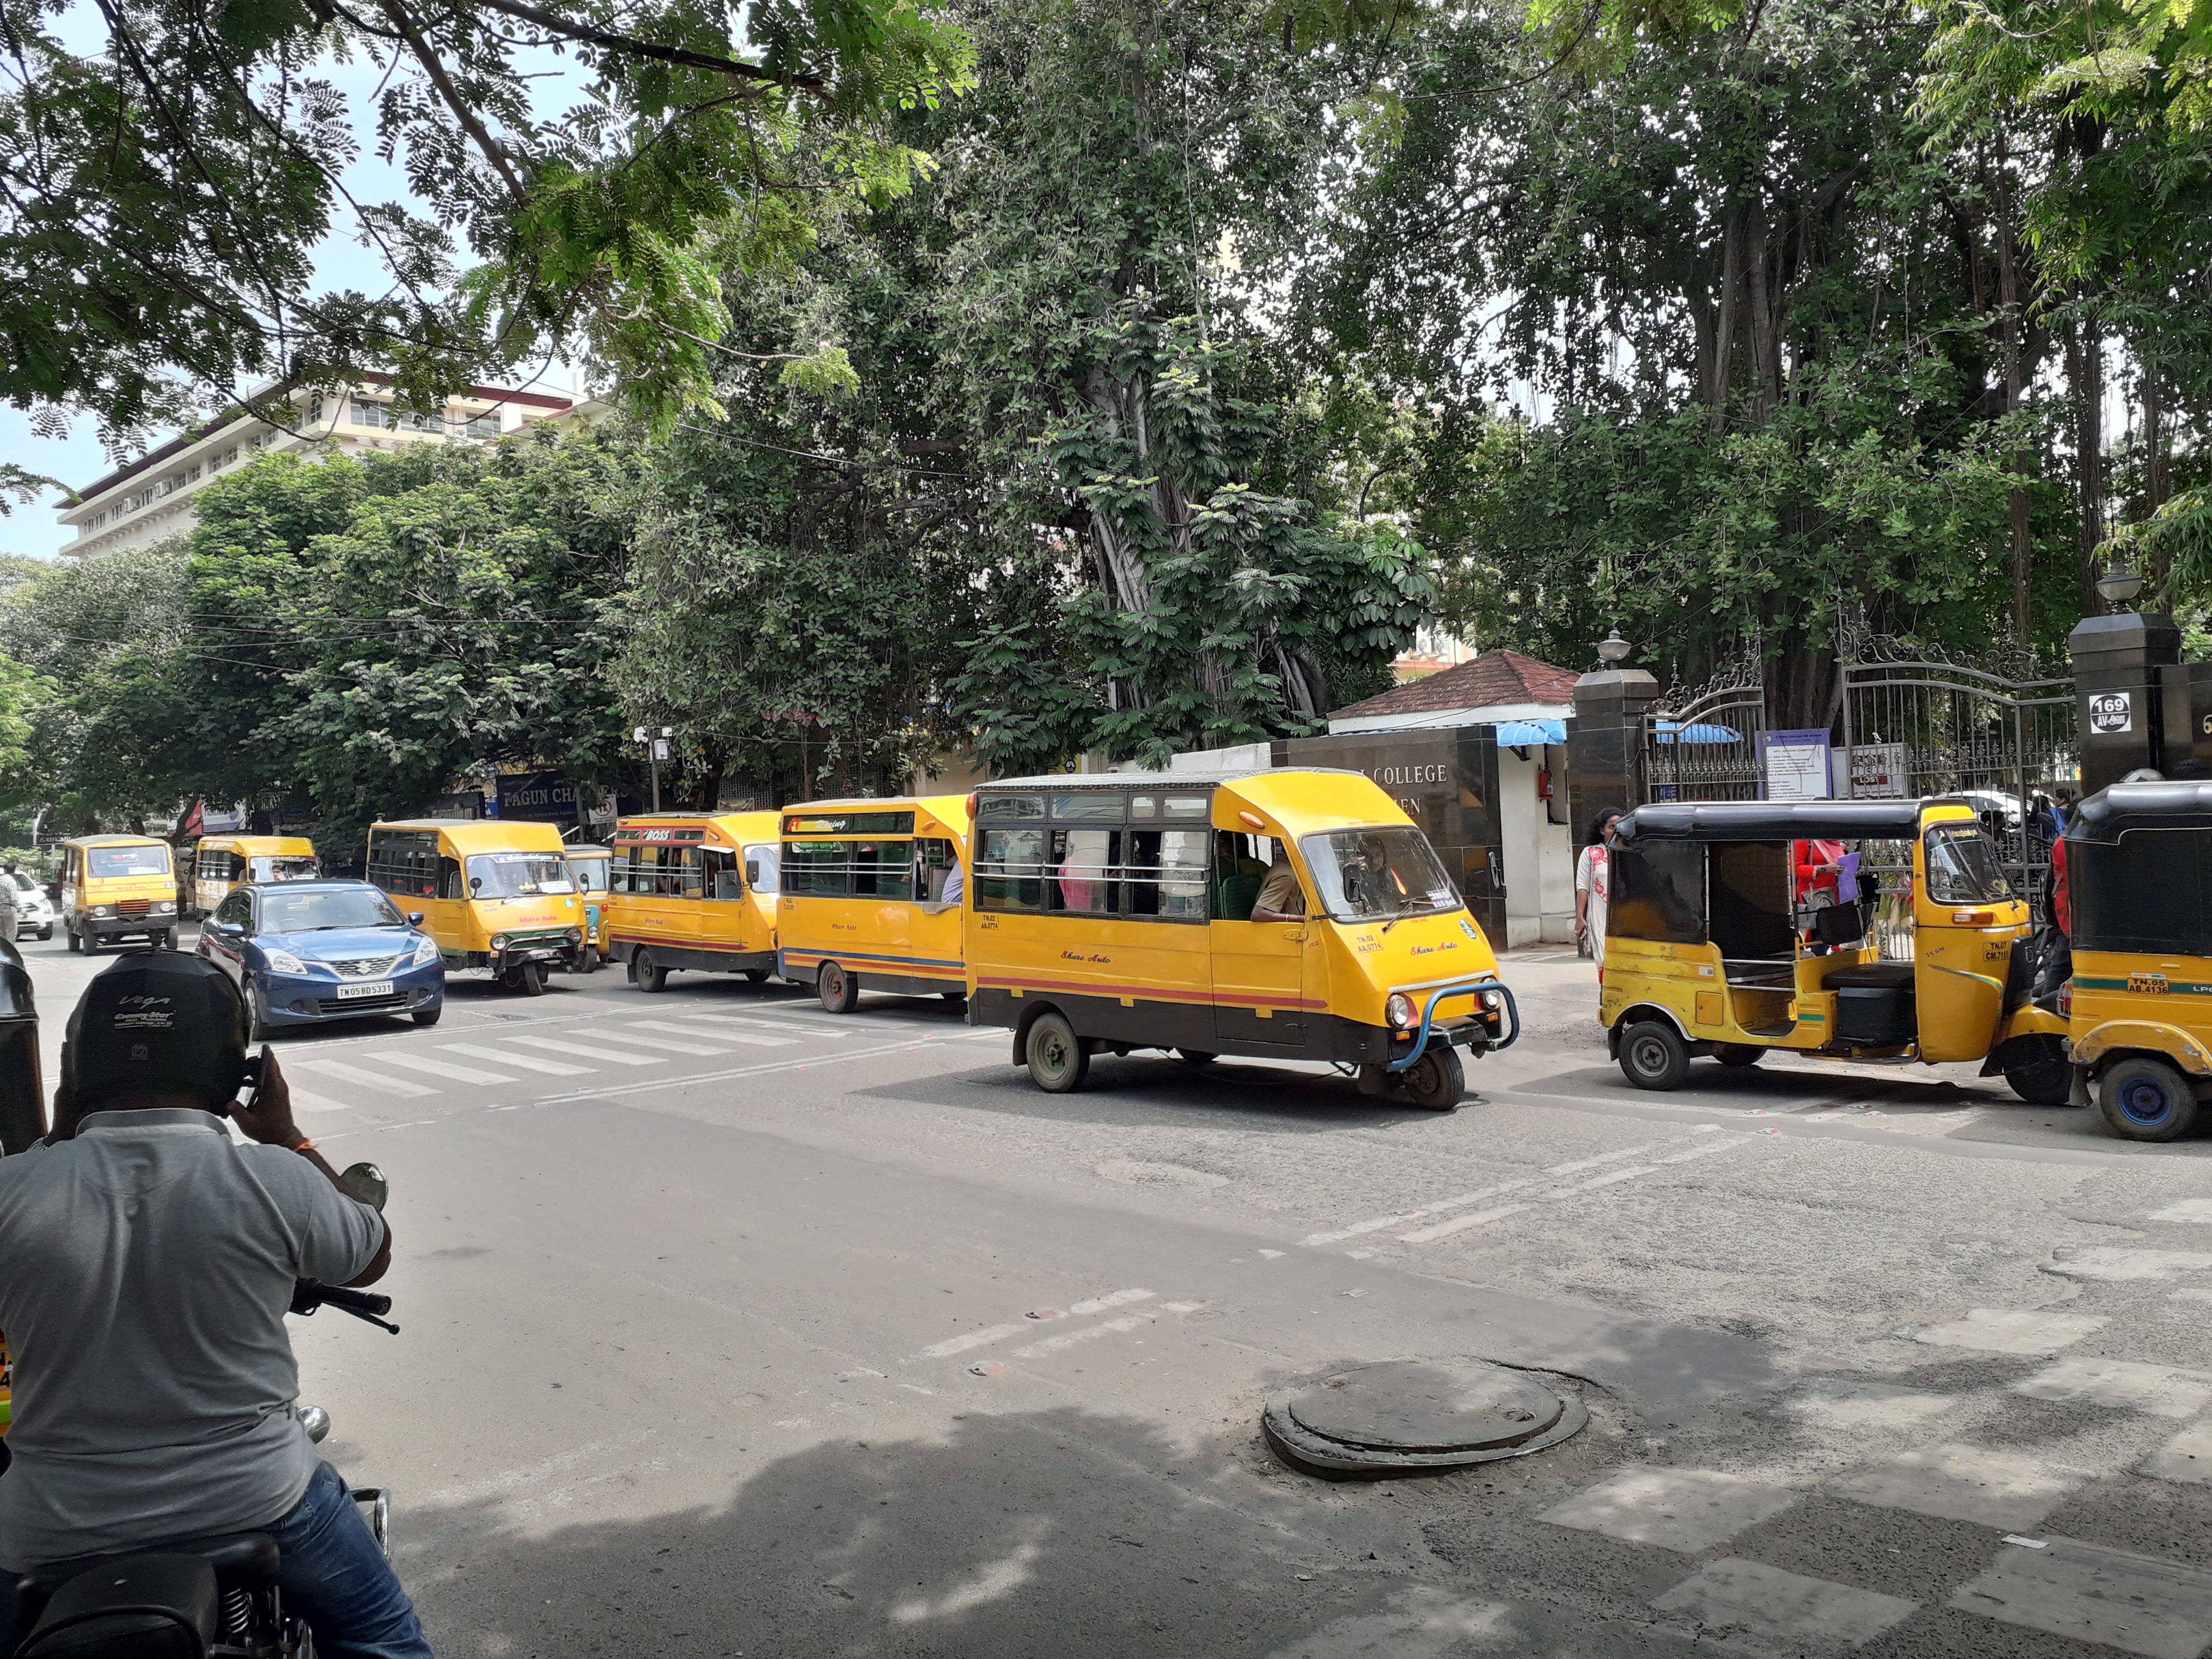 Share auto drivers can often be seen violating traffic rules